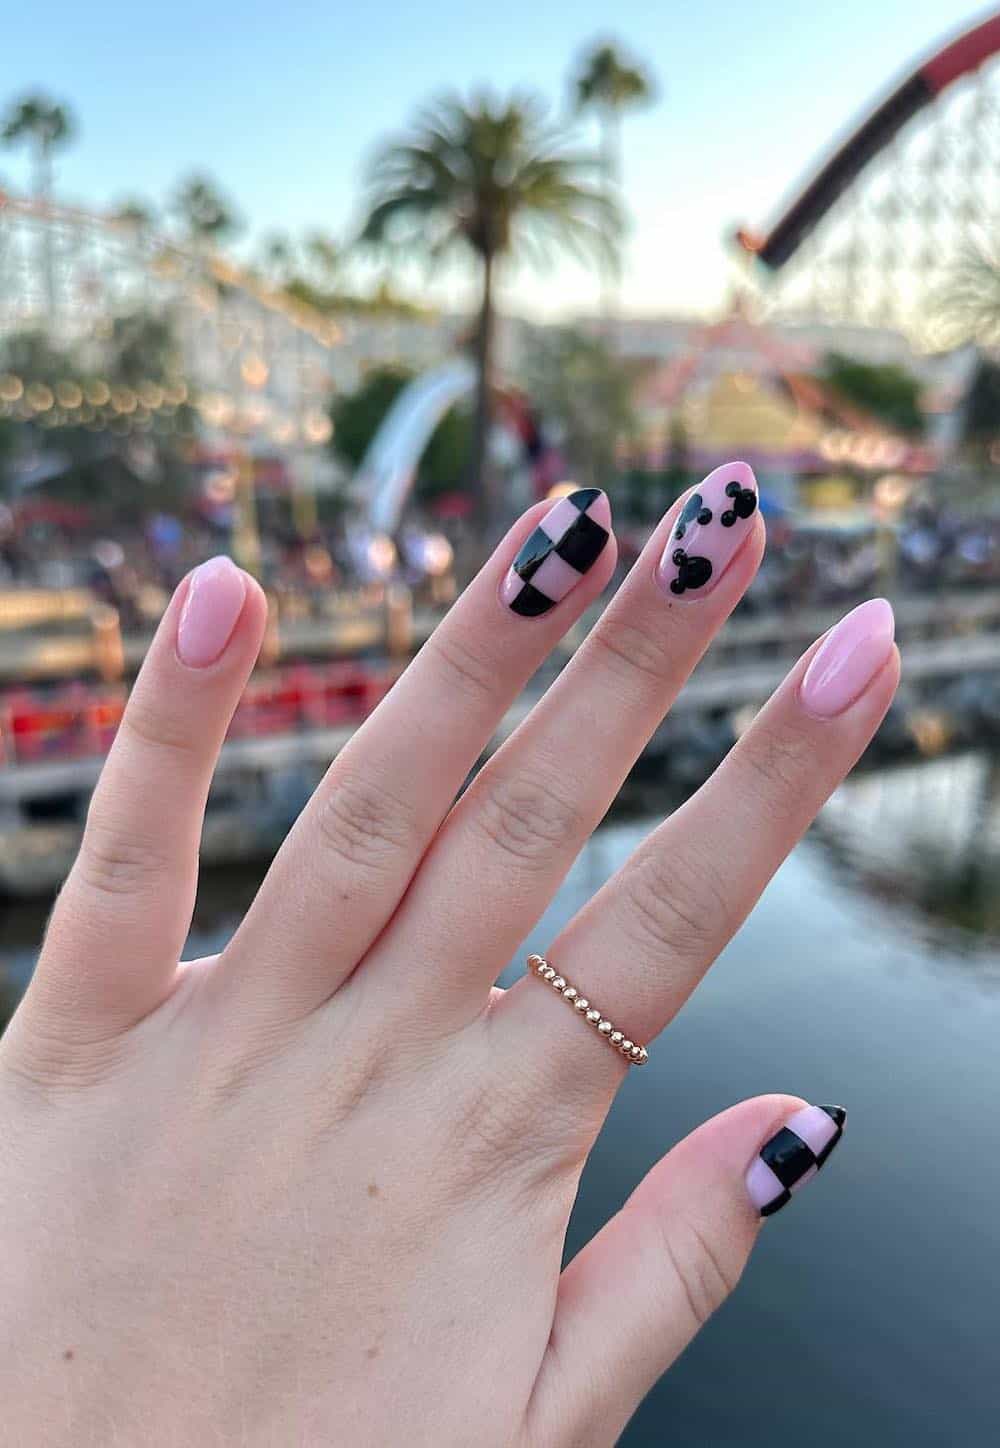 Medium almond nails with a Mickey Mouse design featuring nude pink and black polish with checkerboard print